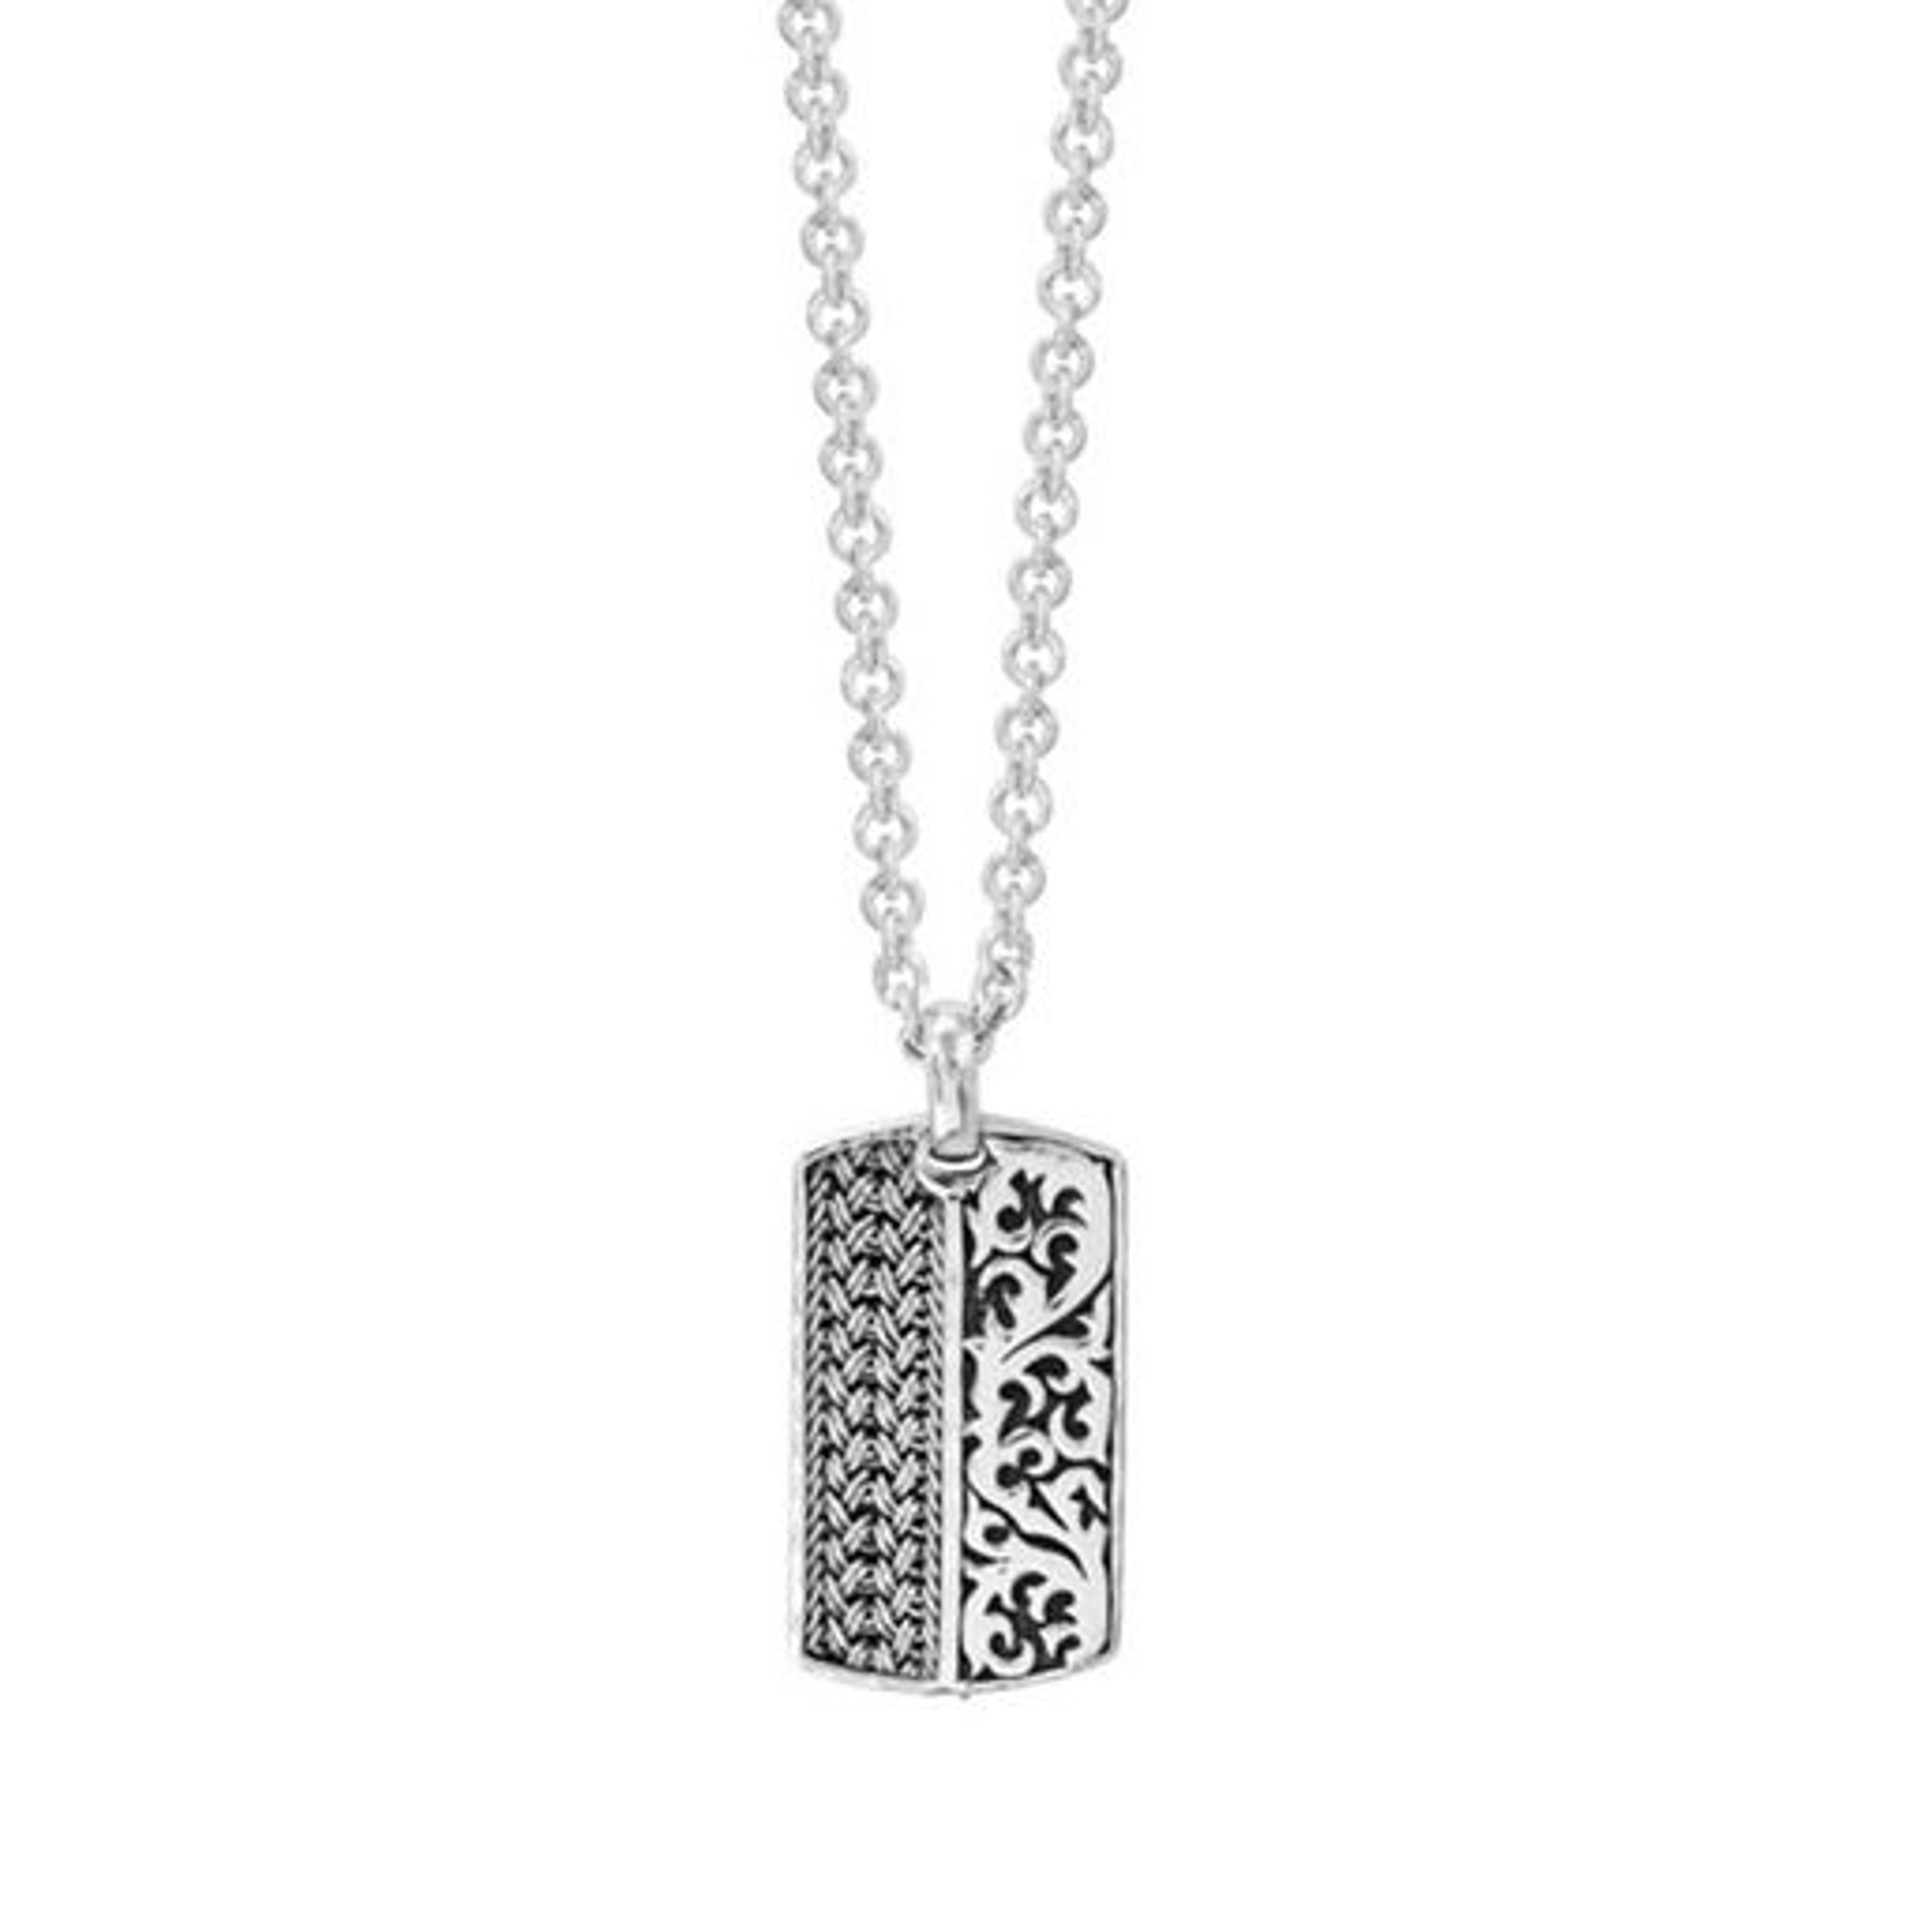 7000 Mens Sterling Silver Woven and Engraving Dog Tag by Lois Hill